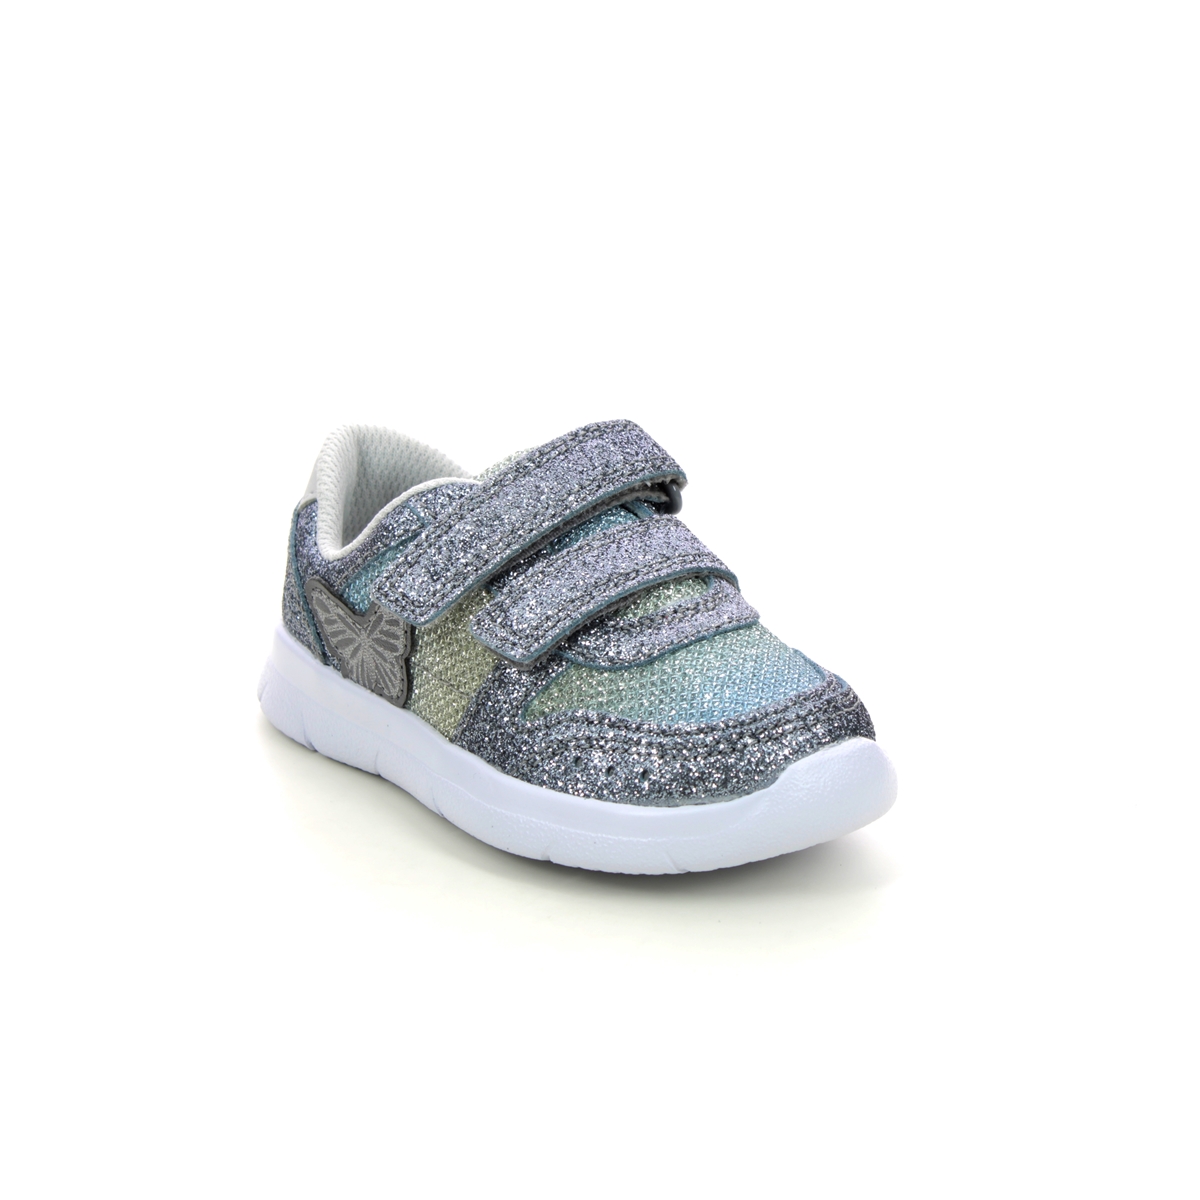 Clarks Ath Wing T Metallic Kids Toddler Girls Trainers 623197G In Size 7 In Plain Metallic G Width Fitting For kids